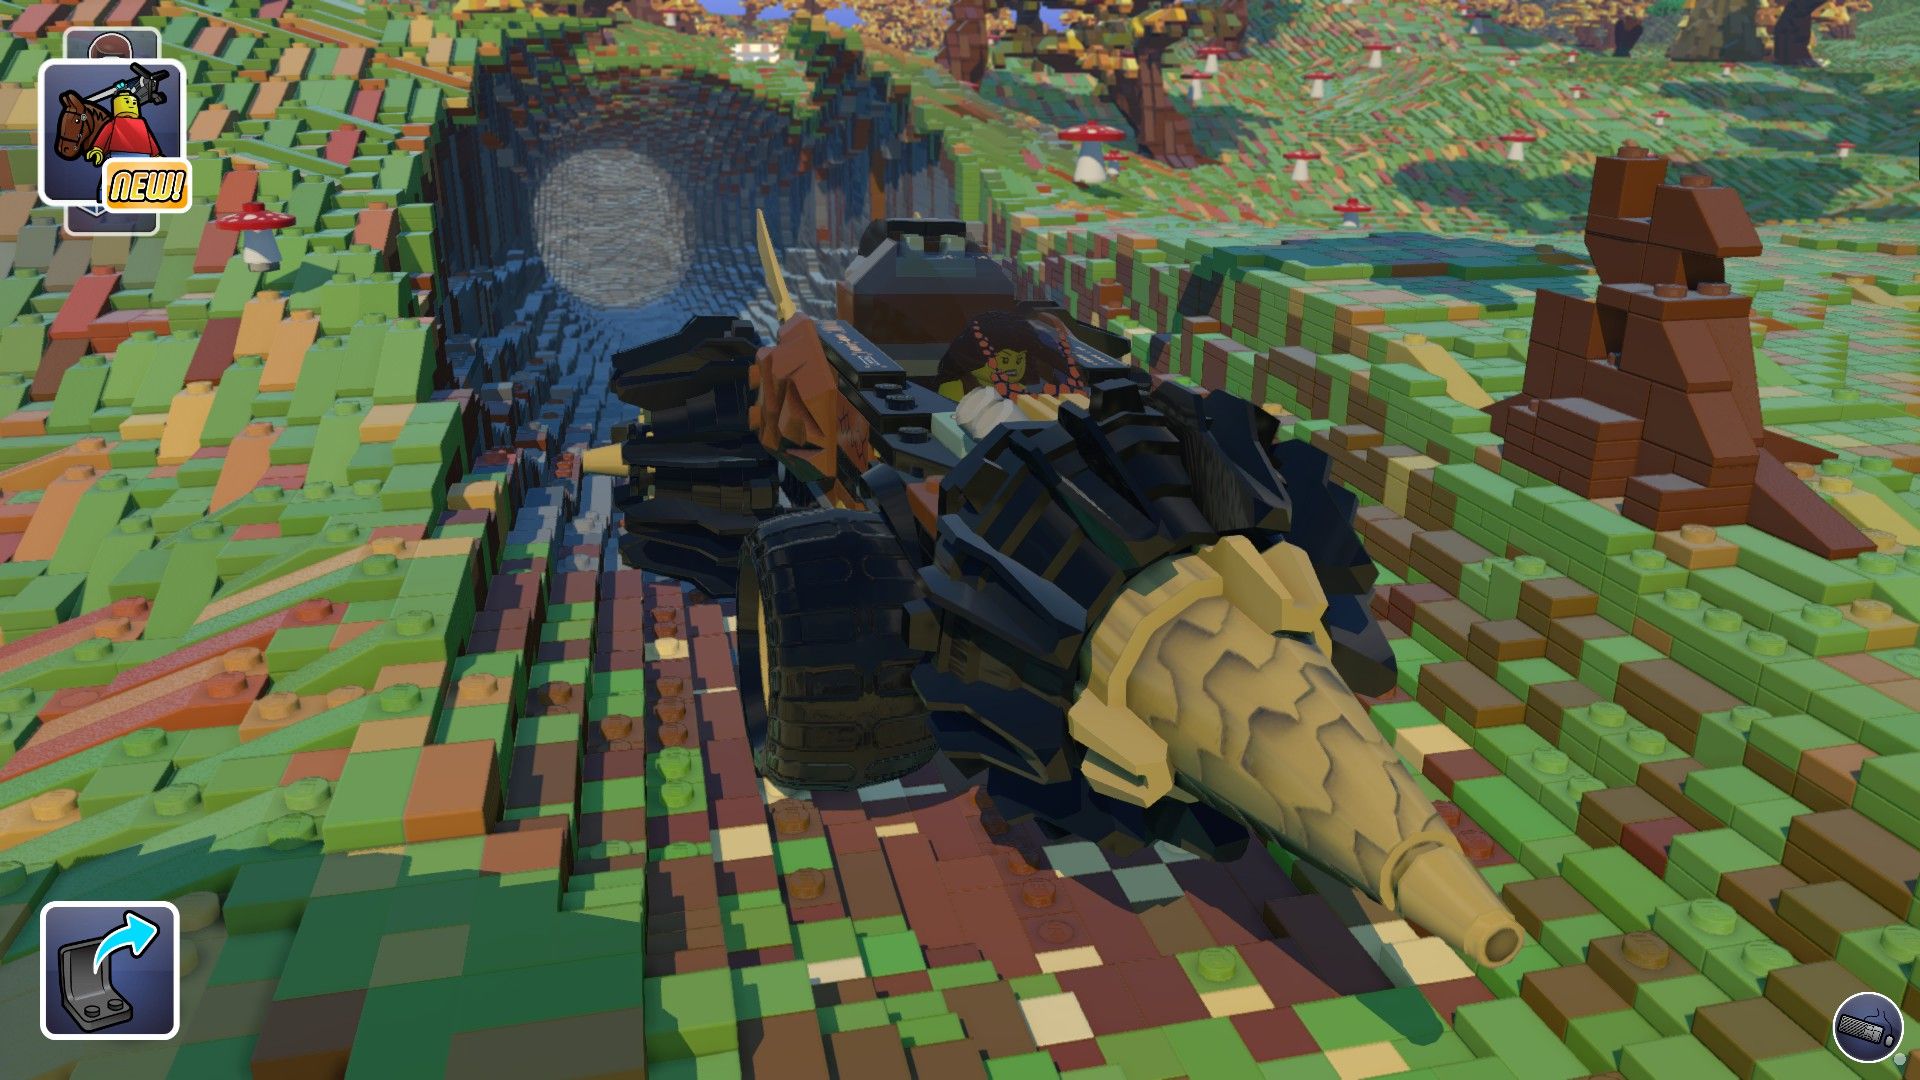 Updates that would take 'lego worlds' up a notch